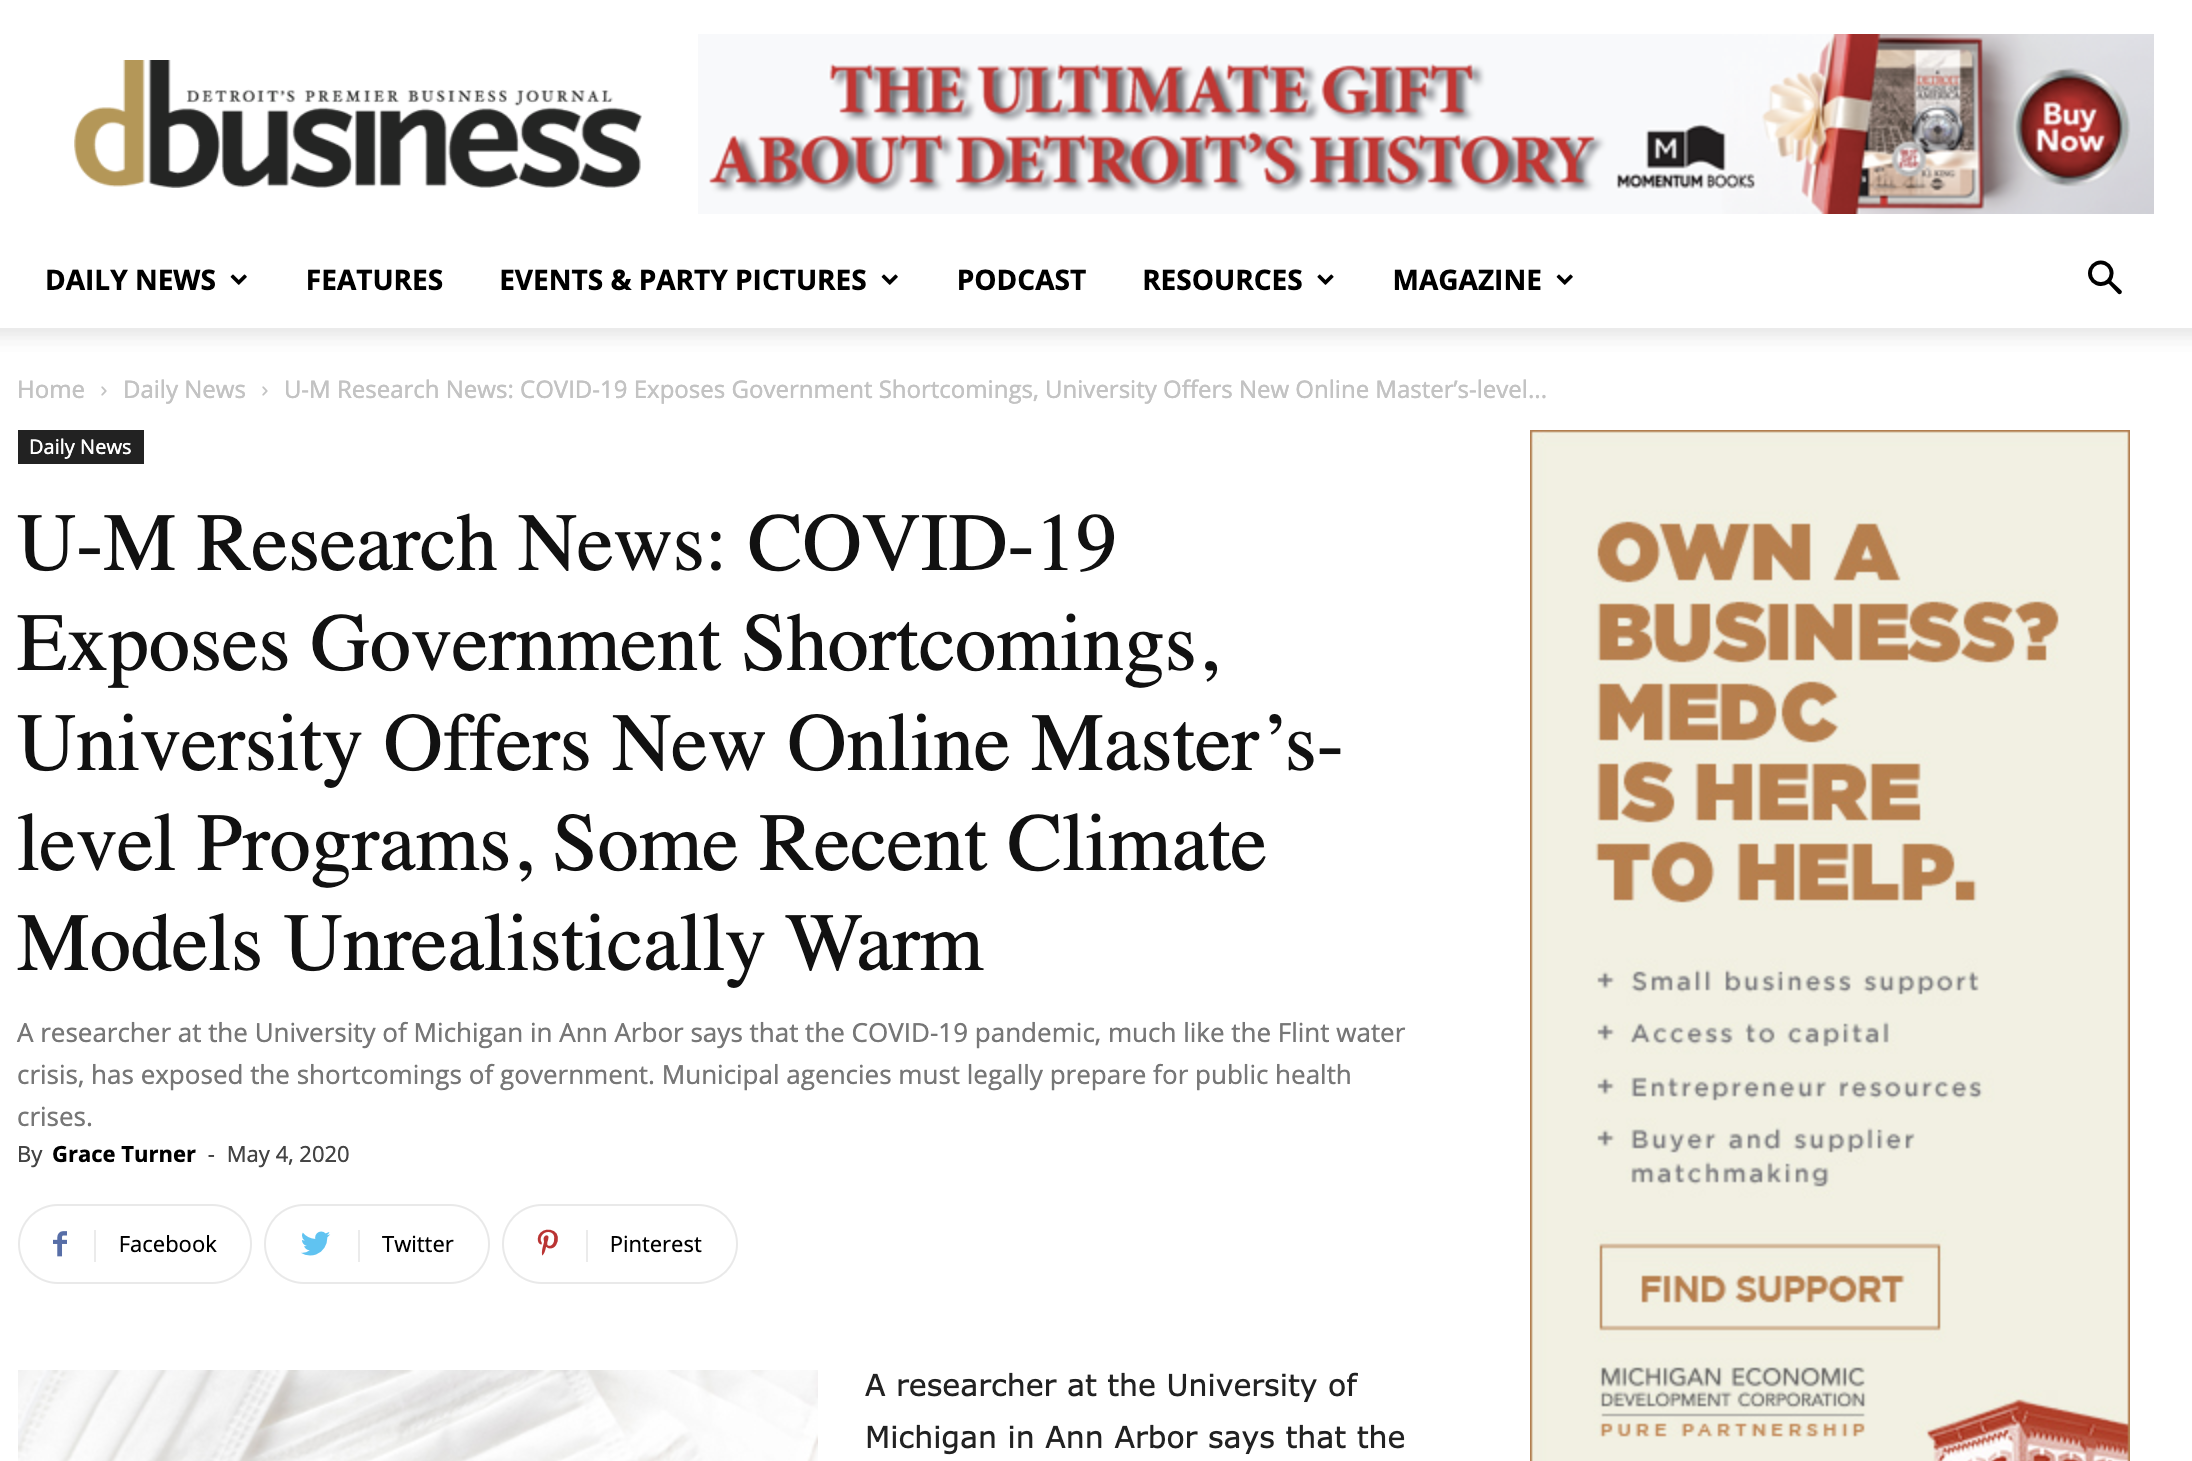 U-M Research News: COVID-19 Exposes Government Shortcomings, University Offers New Online Master’s-level Programs, Some Recent Climate Models Unrealistically Warm